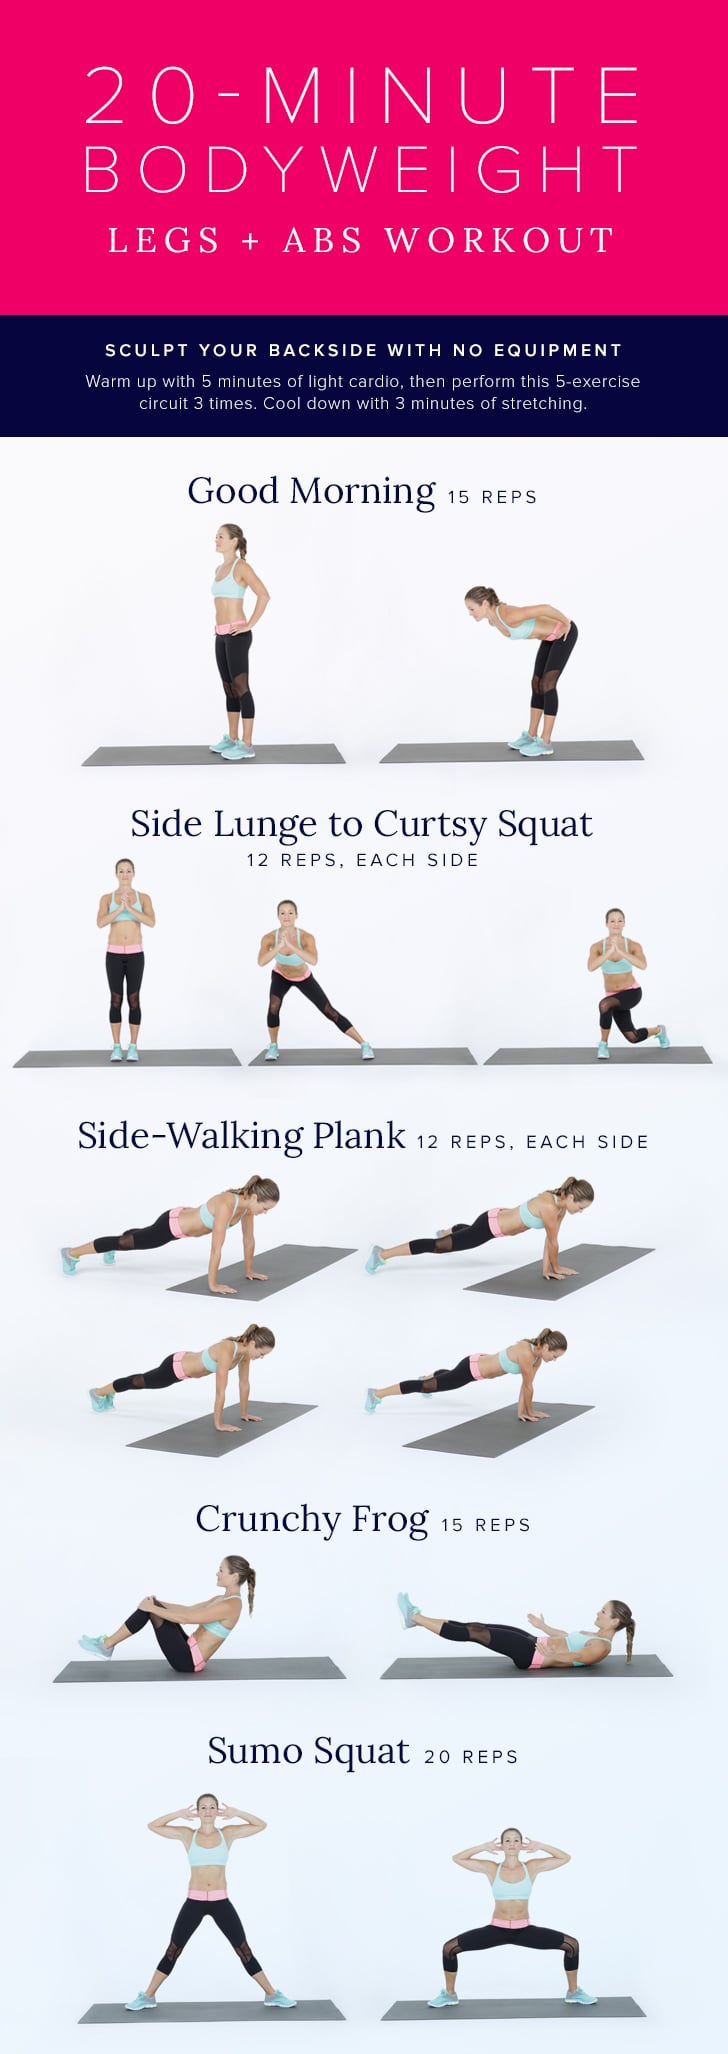 20-Minute Legs Workout for Strength - No Equipment with Warm Up